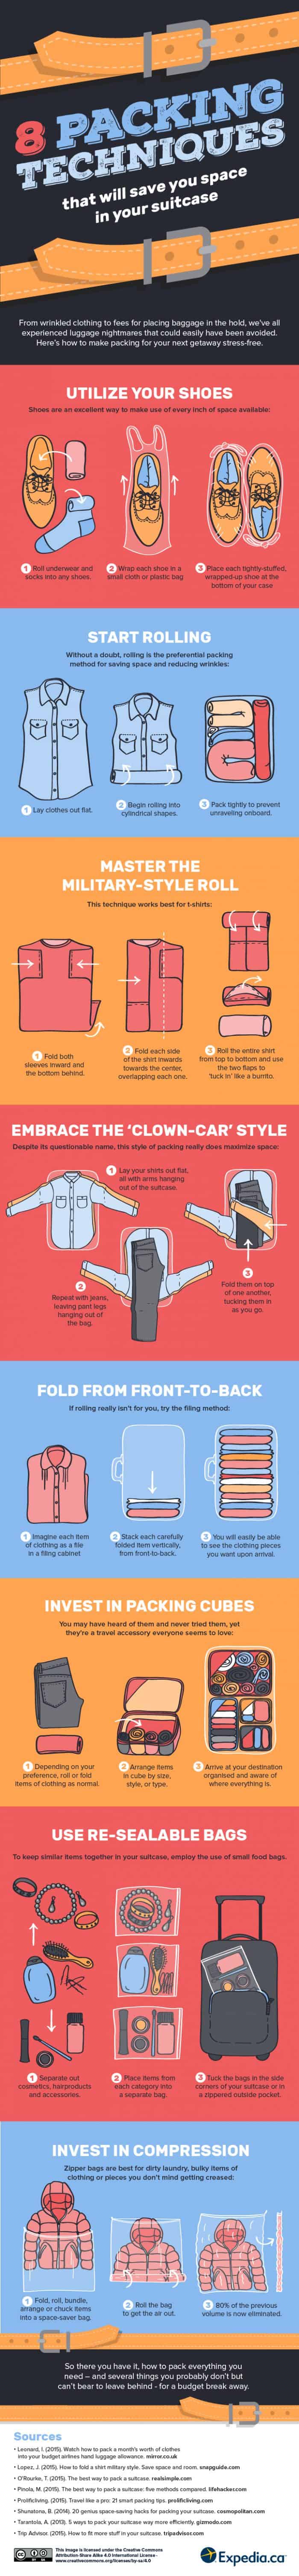 8 Pro Packing Techniques Infographic